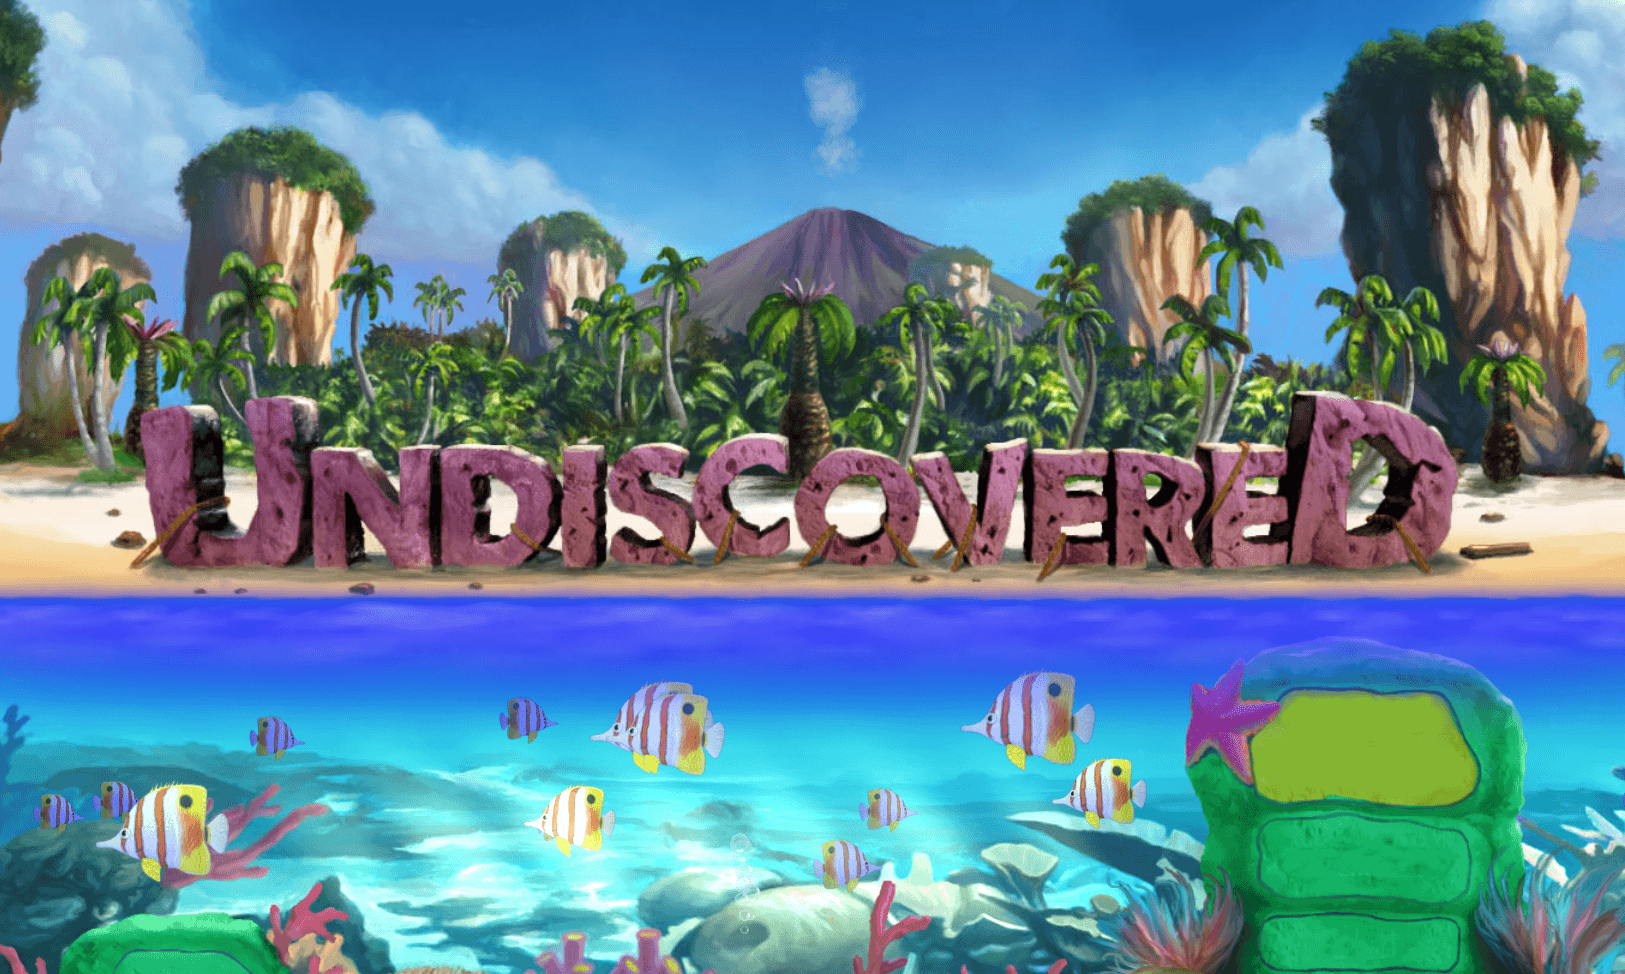 Undiscovered Review: Puzzle Island Paradise